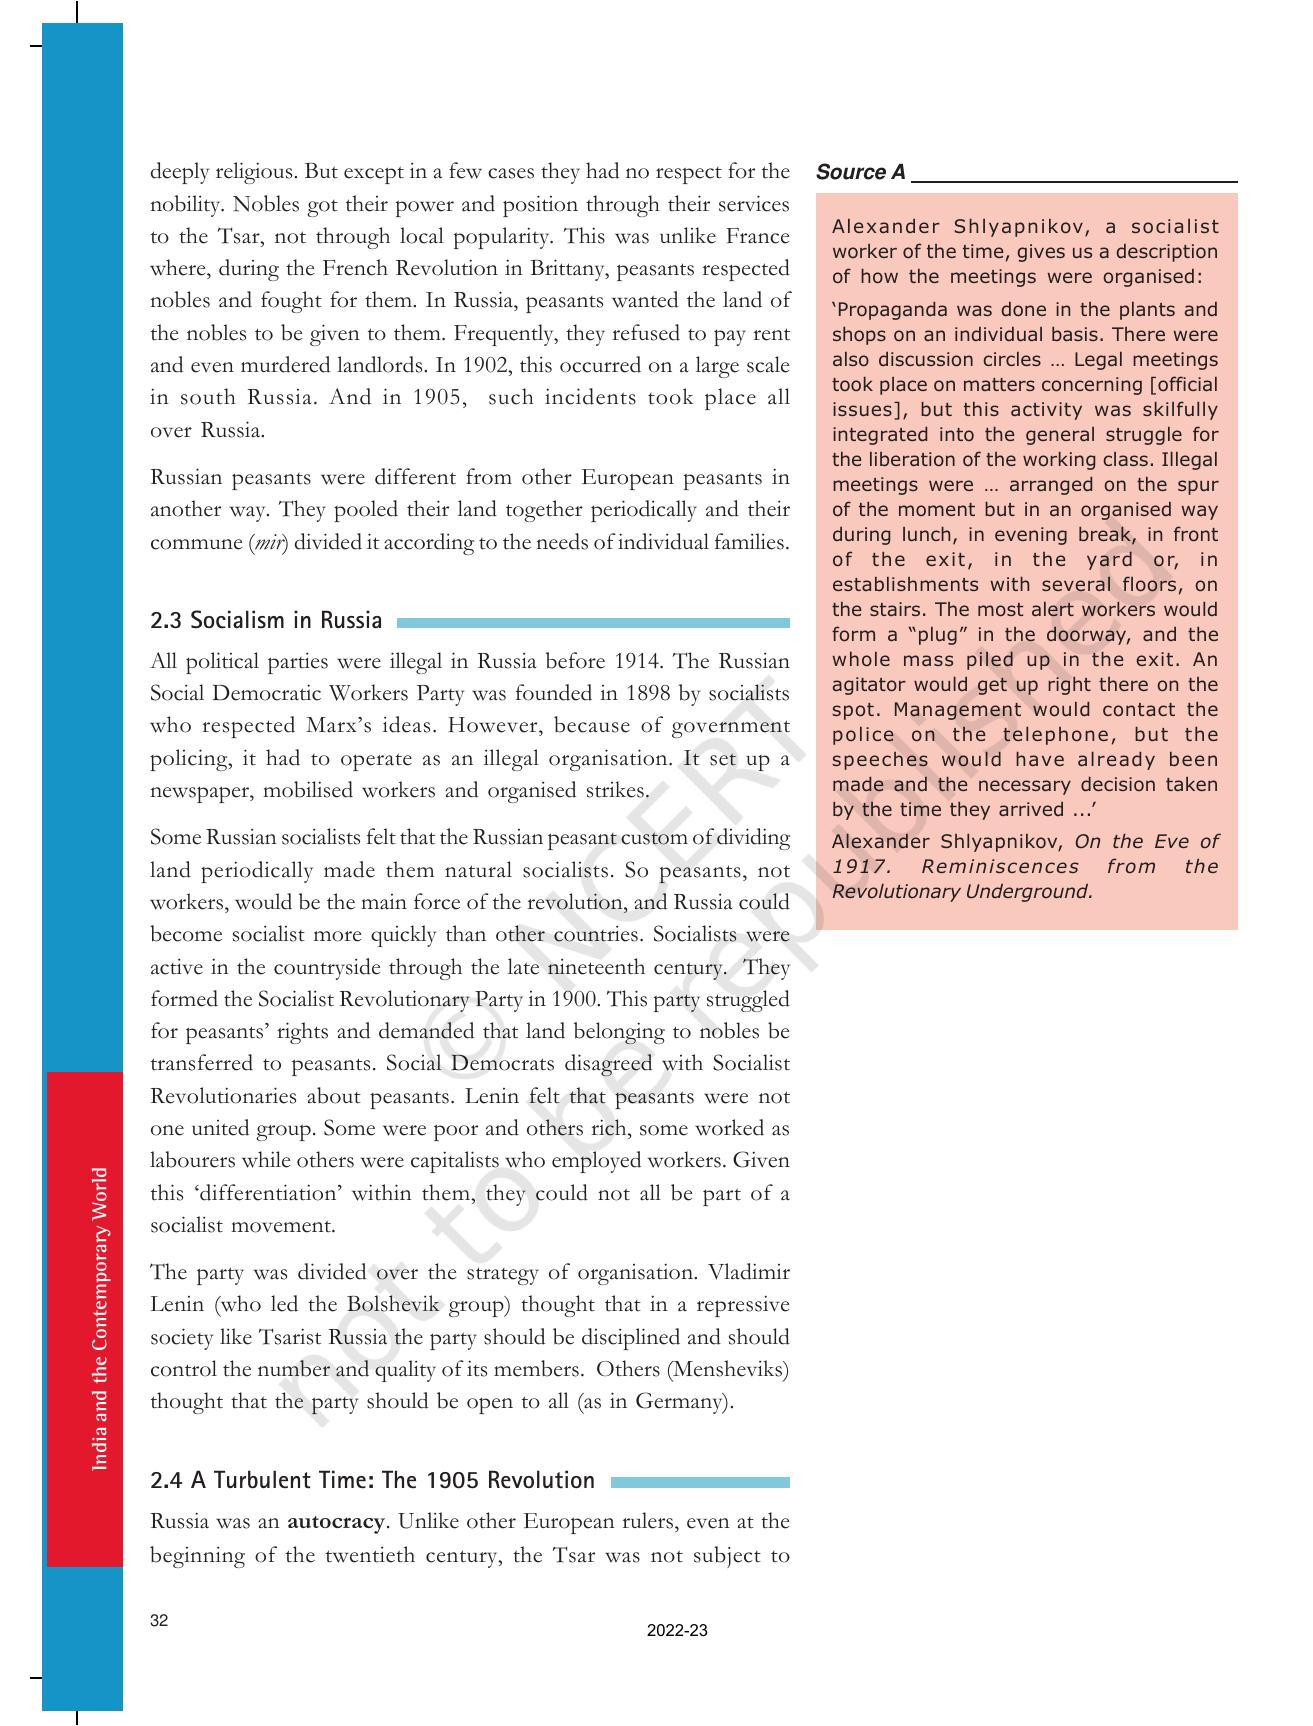 NCERT Book for Class 9 History Chapter 2 Socialism in Europe and the Russian Revolution - Page 8